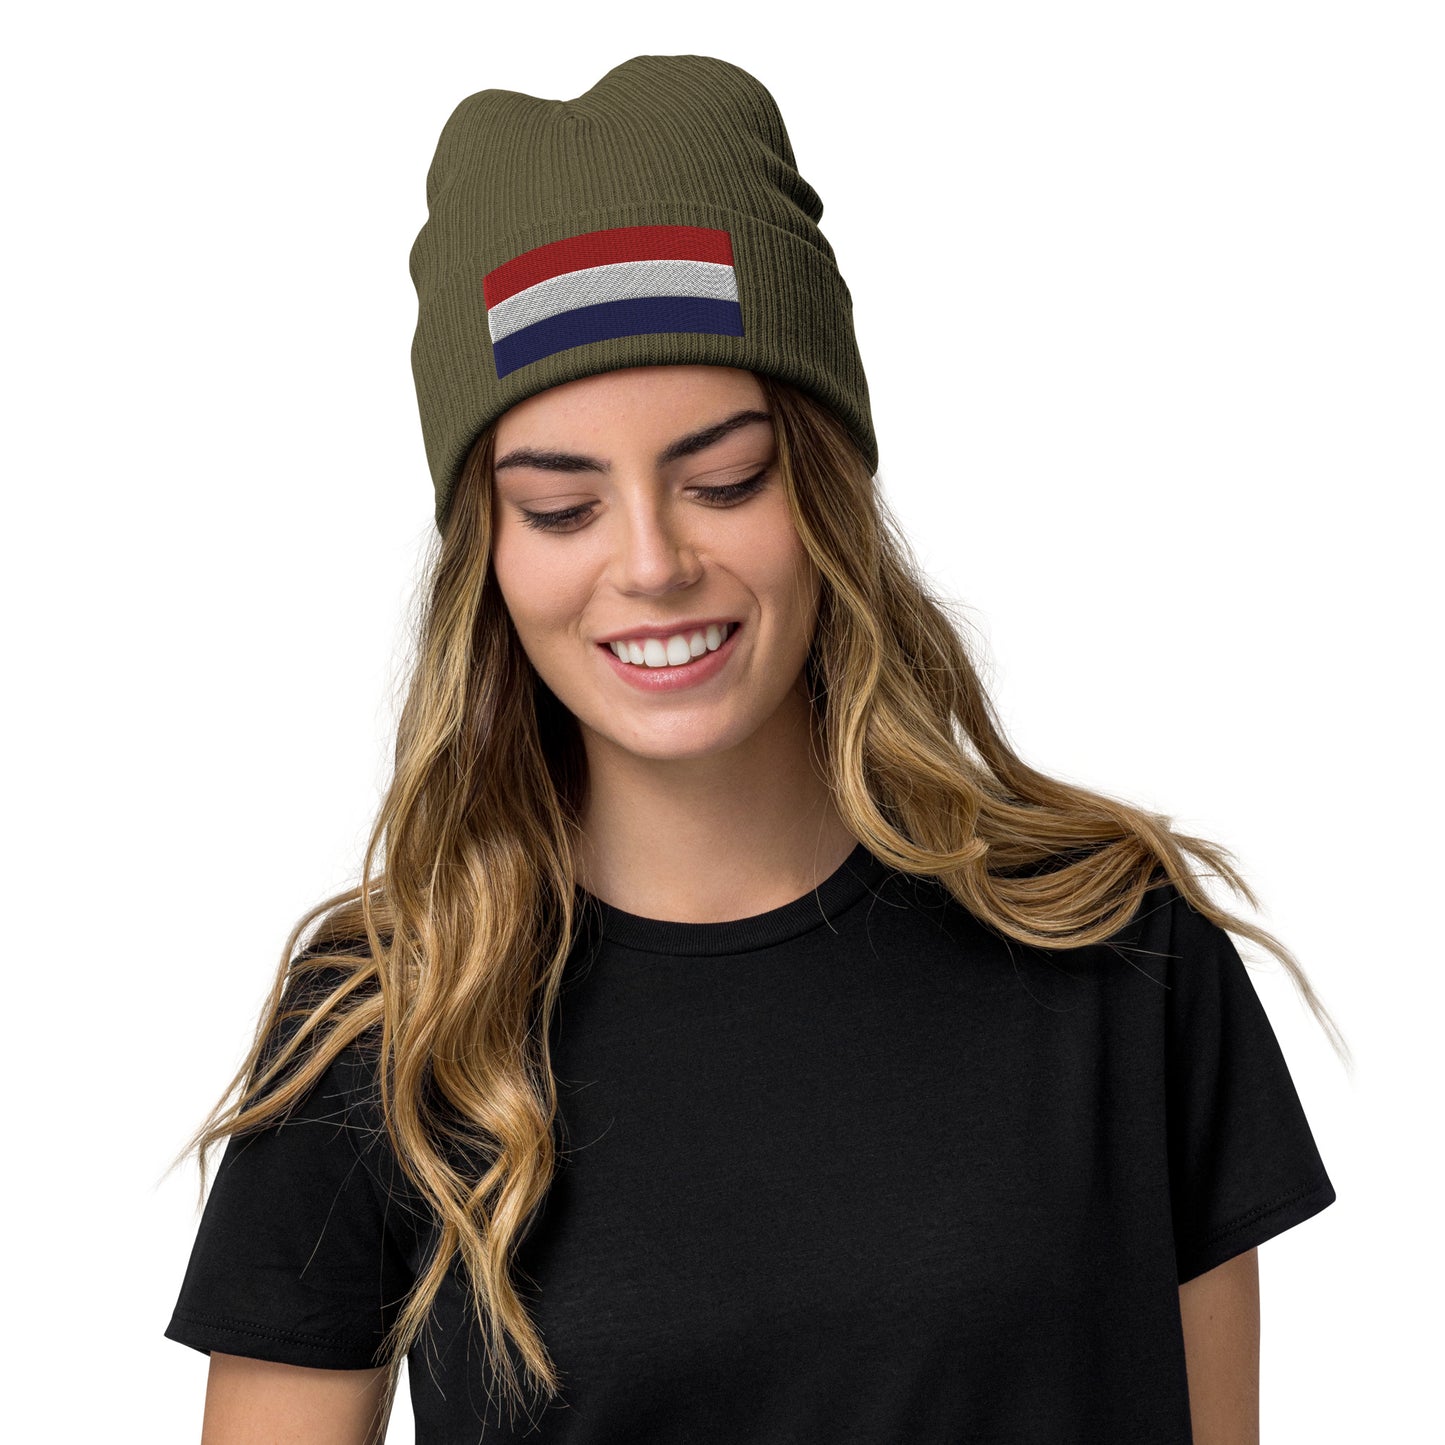 olive Colours Of The Netherlands Flag Beanie / Premium Quality Beanie With Embroidered Flag Of The Netherlands